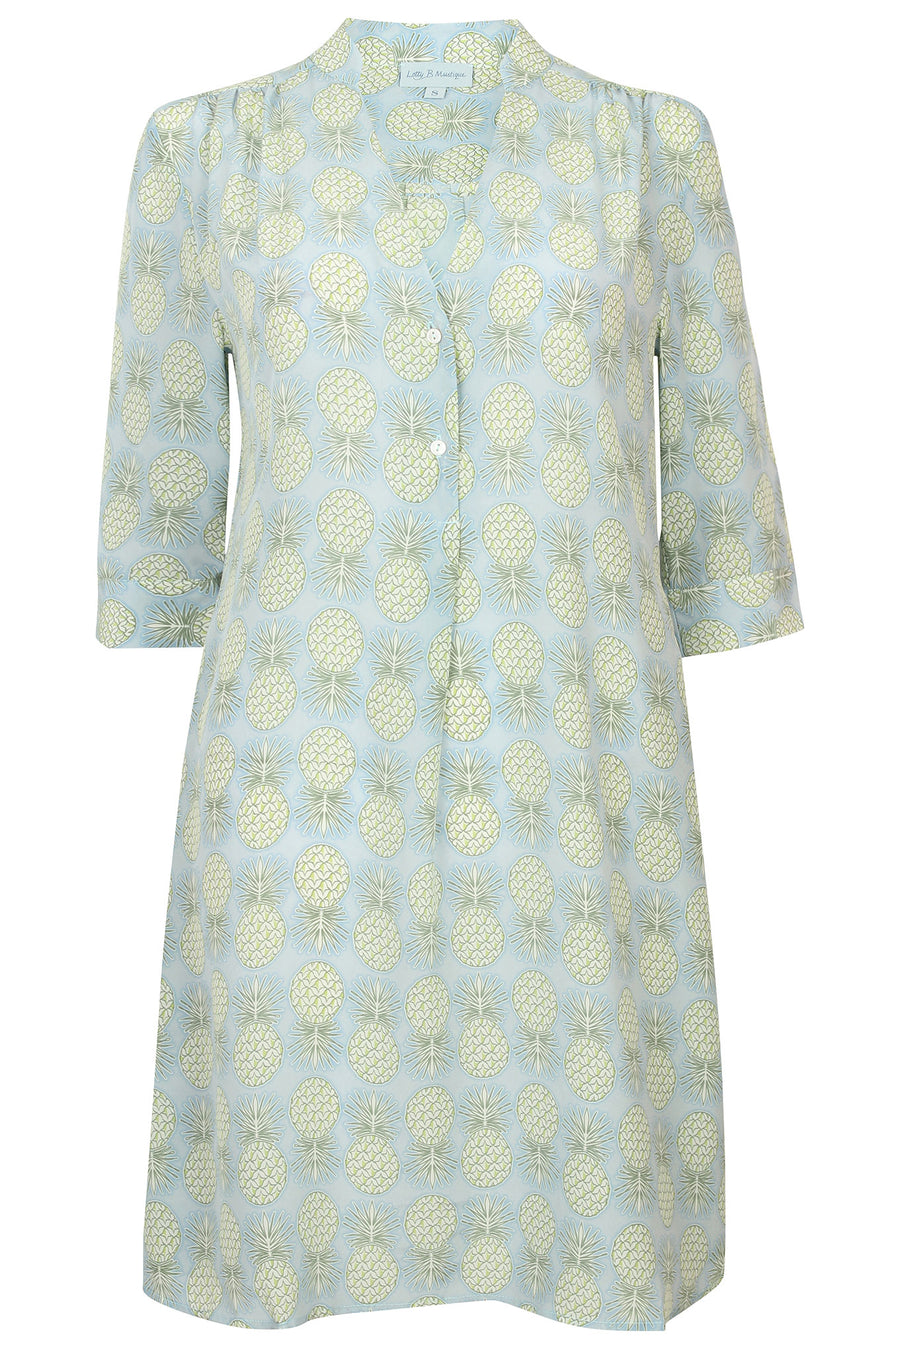 Lotty B Flared Dress in Silk Crepe-de-Chine: PINEAPPLE - OLIVE Mustique life